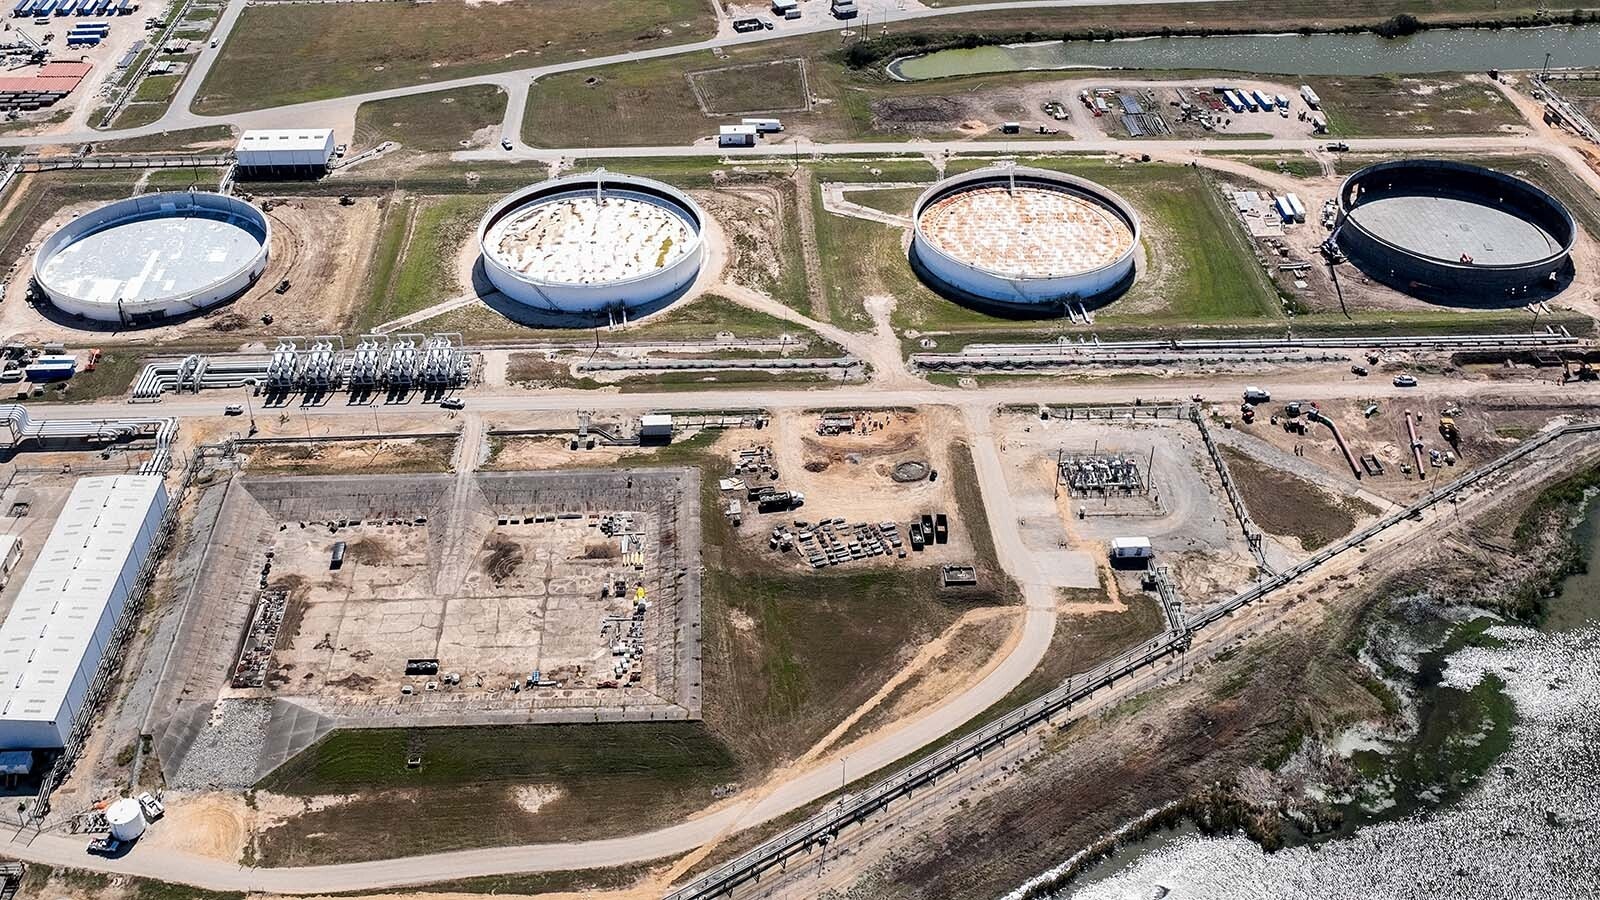 The Strategic Petroleum Reserve storage at the Bryan Mound site in Freeport, Texas.